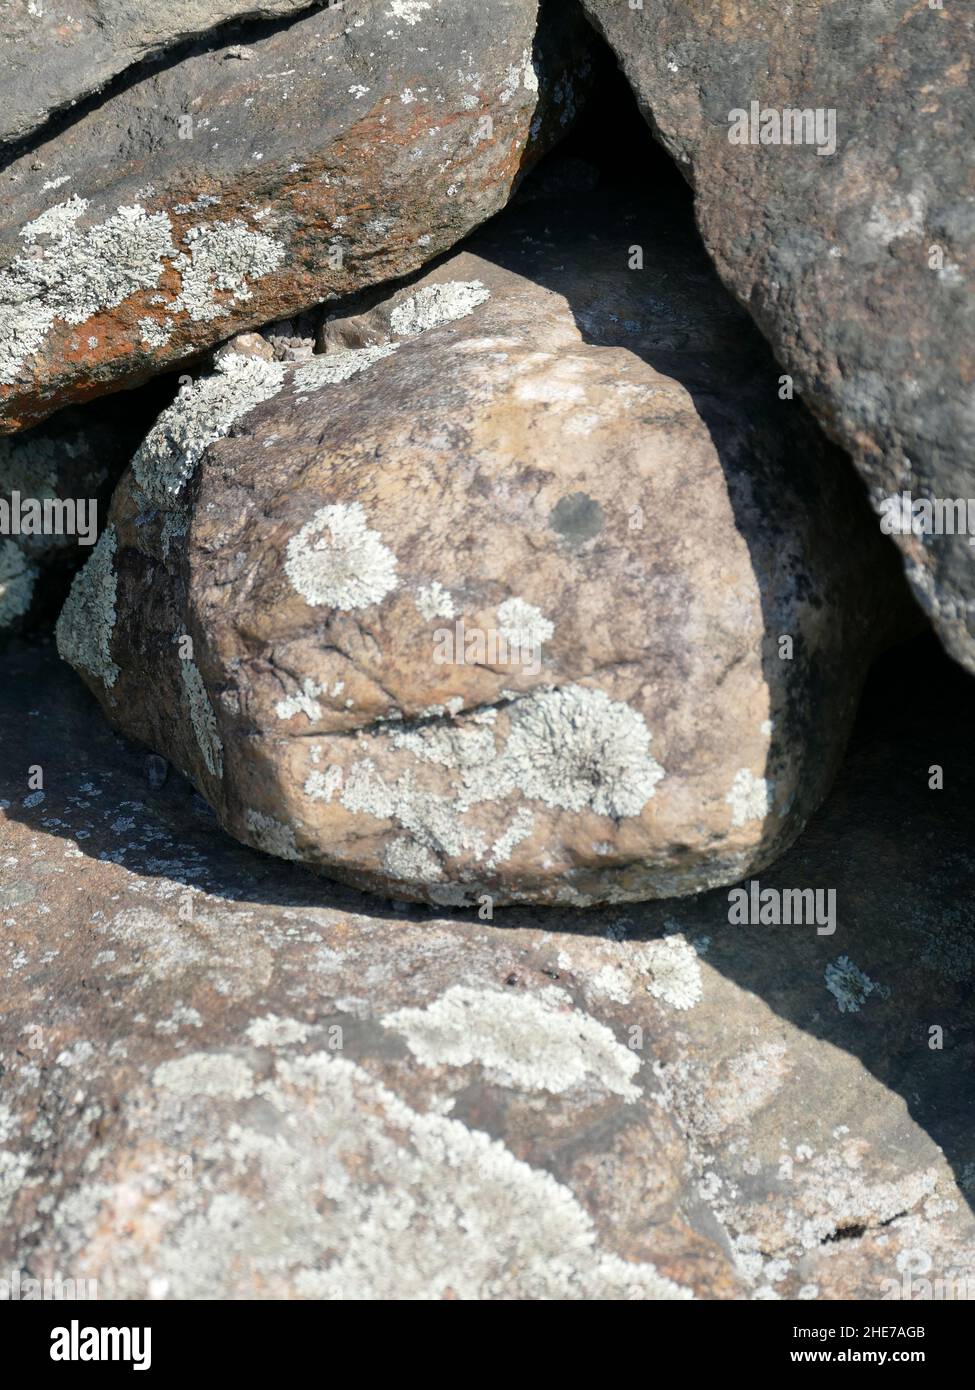 https://c8.alamy.com/comp/2HE7AGB/close-up-photograph-of-gray-rocks-growing-light-green-lichen-creating-a-spotted-pattern-on-the-rock-surface-2HE7AGB.jpg